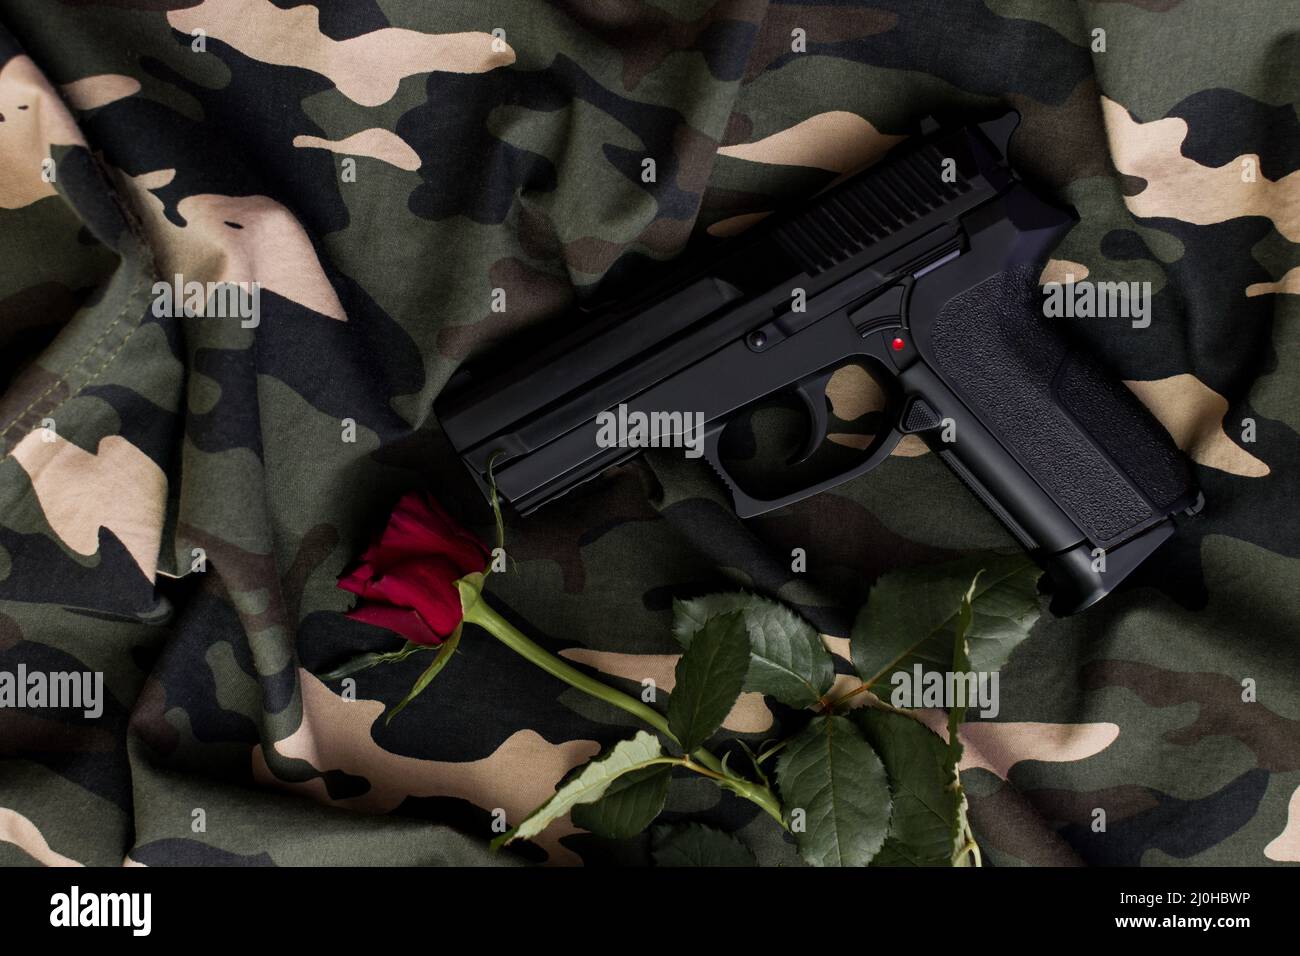 Top view, black handgun and red rose on military uniform Stock Photo